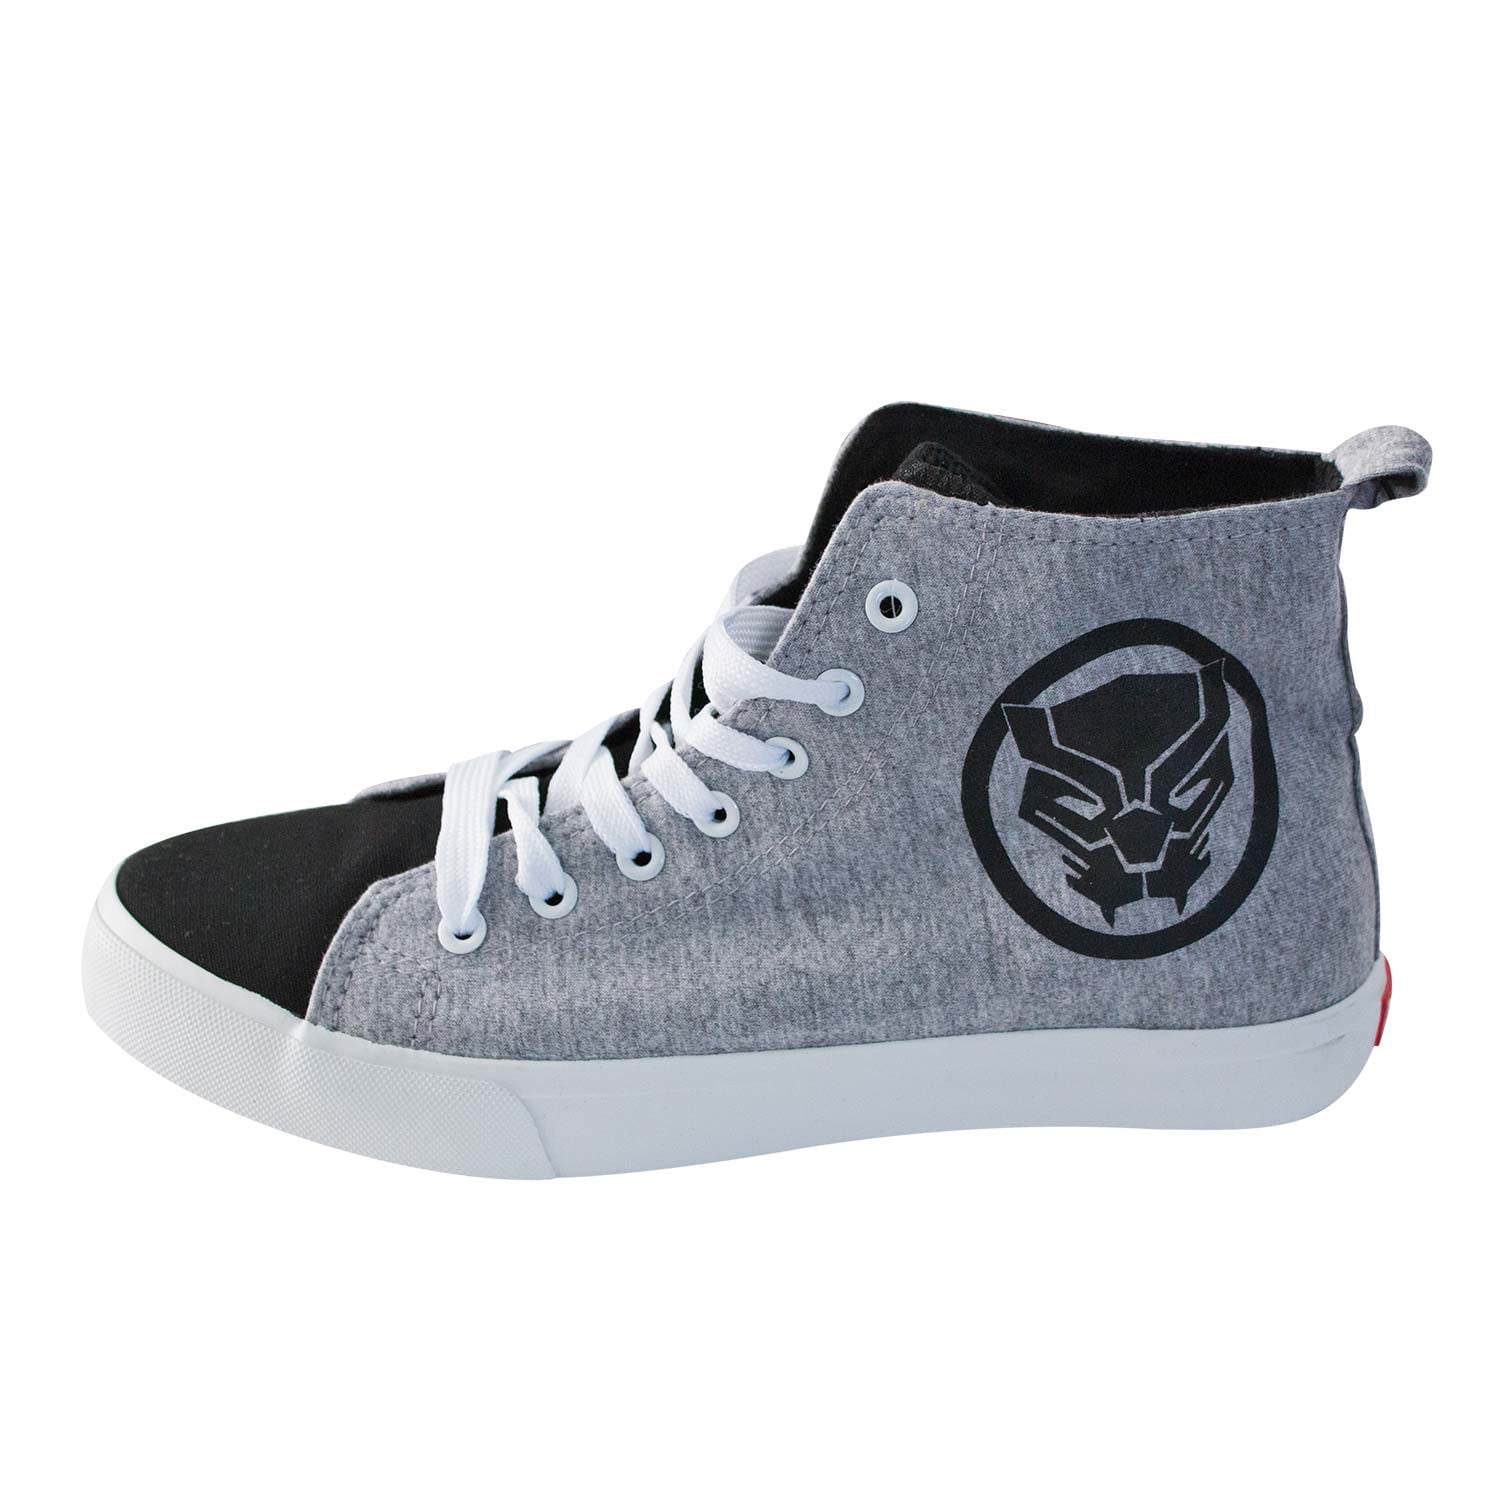 Black Panther Gray Sneakers-10 